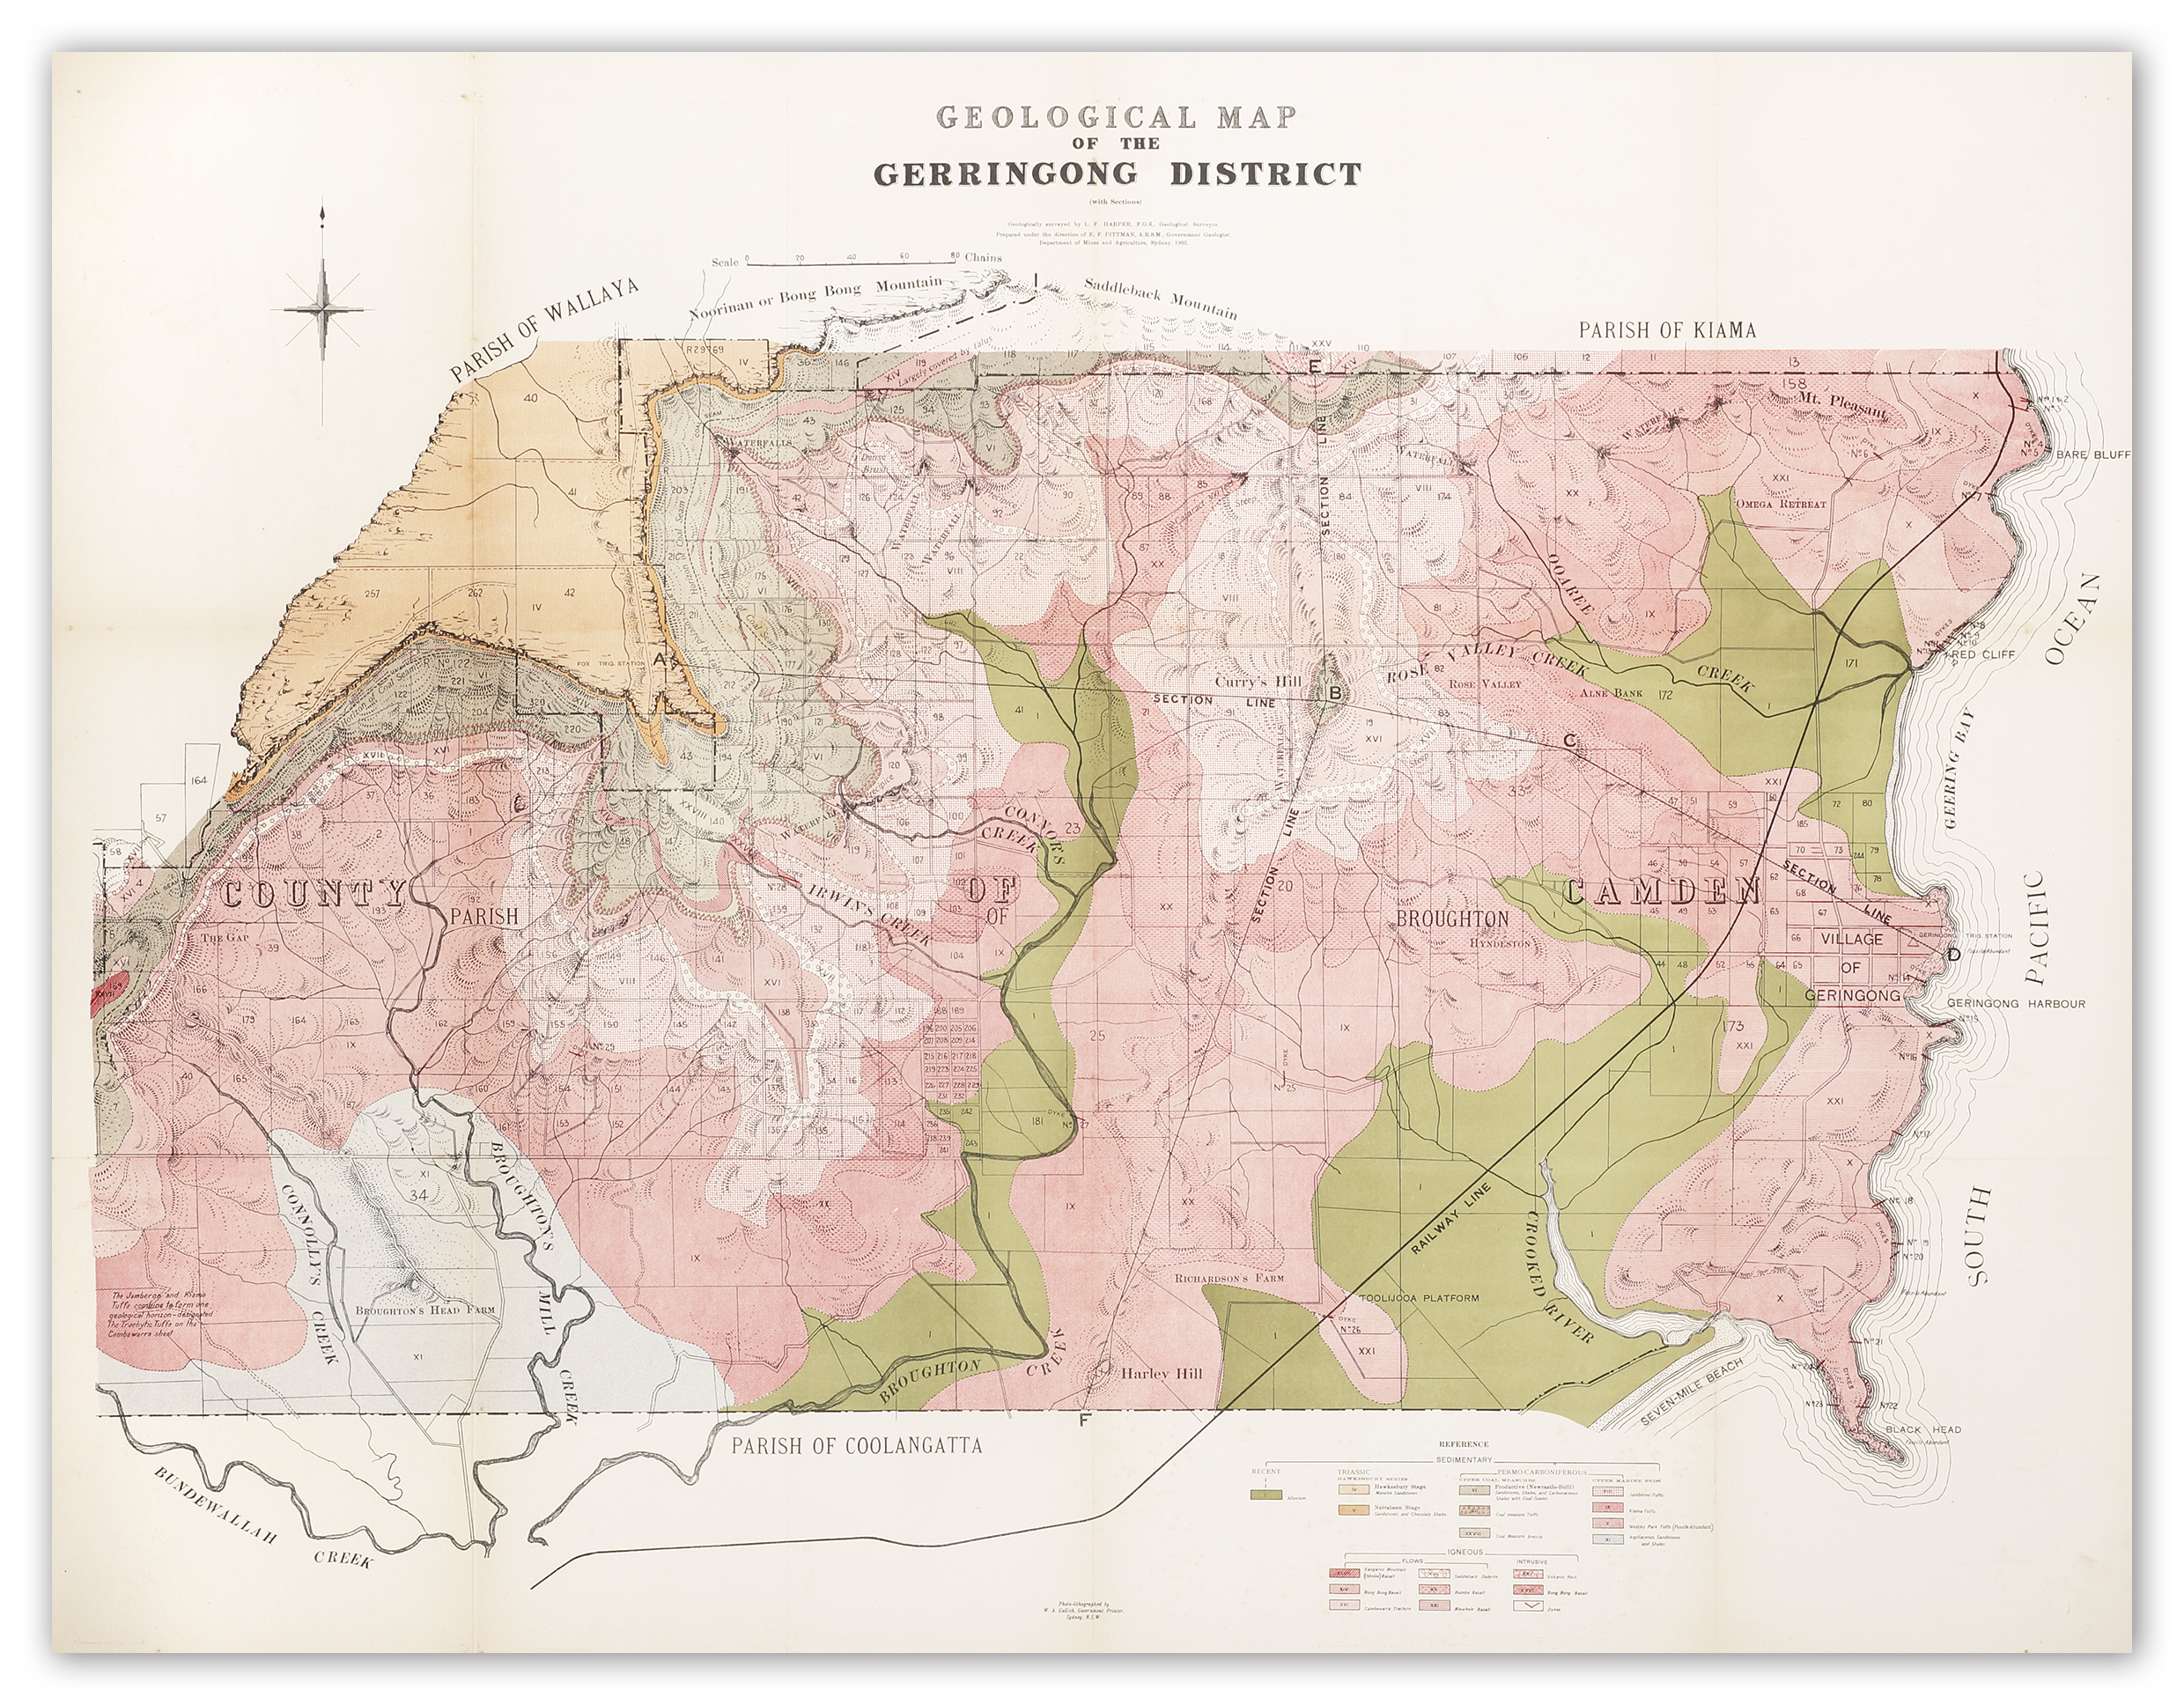 [Gerringong] Geological Map of the Gerringong District. - Antique Map from 1915